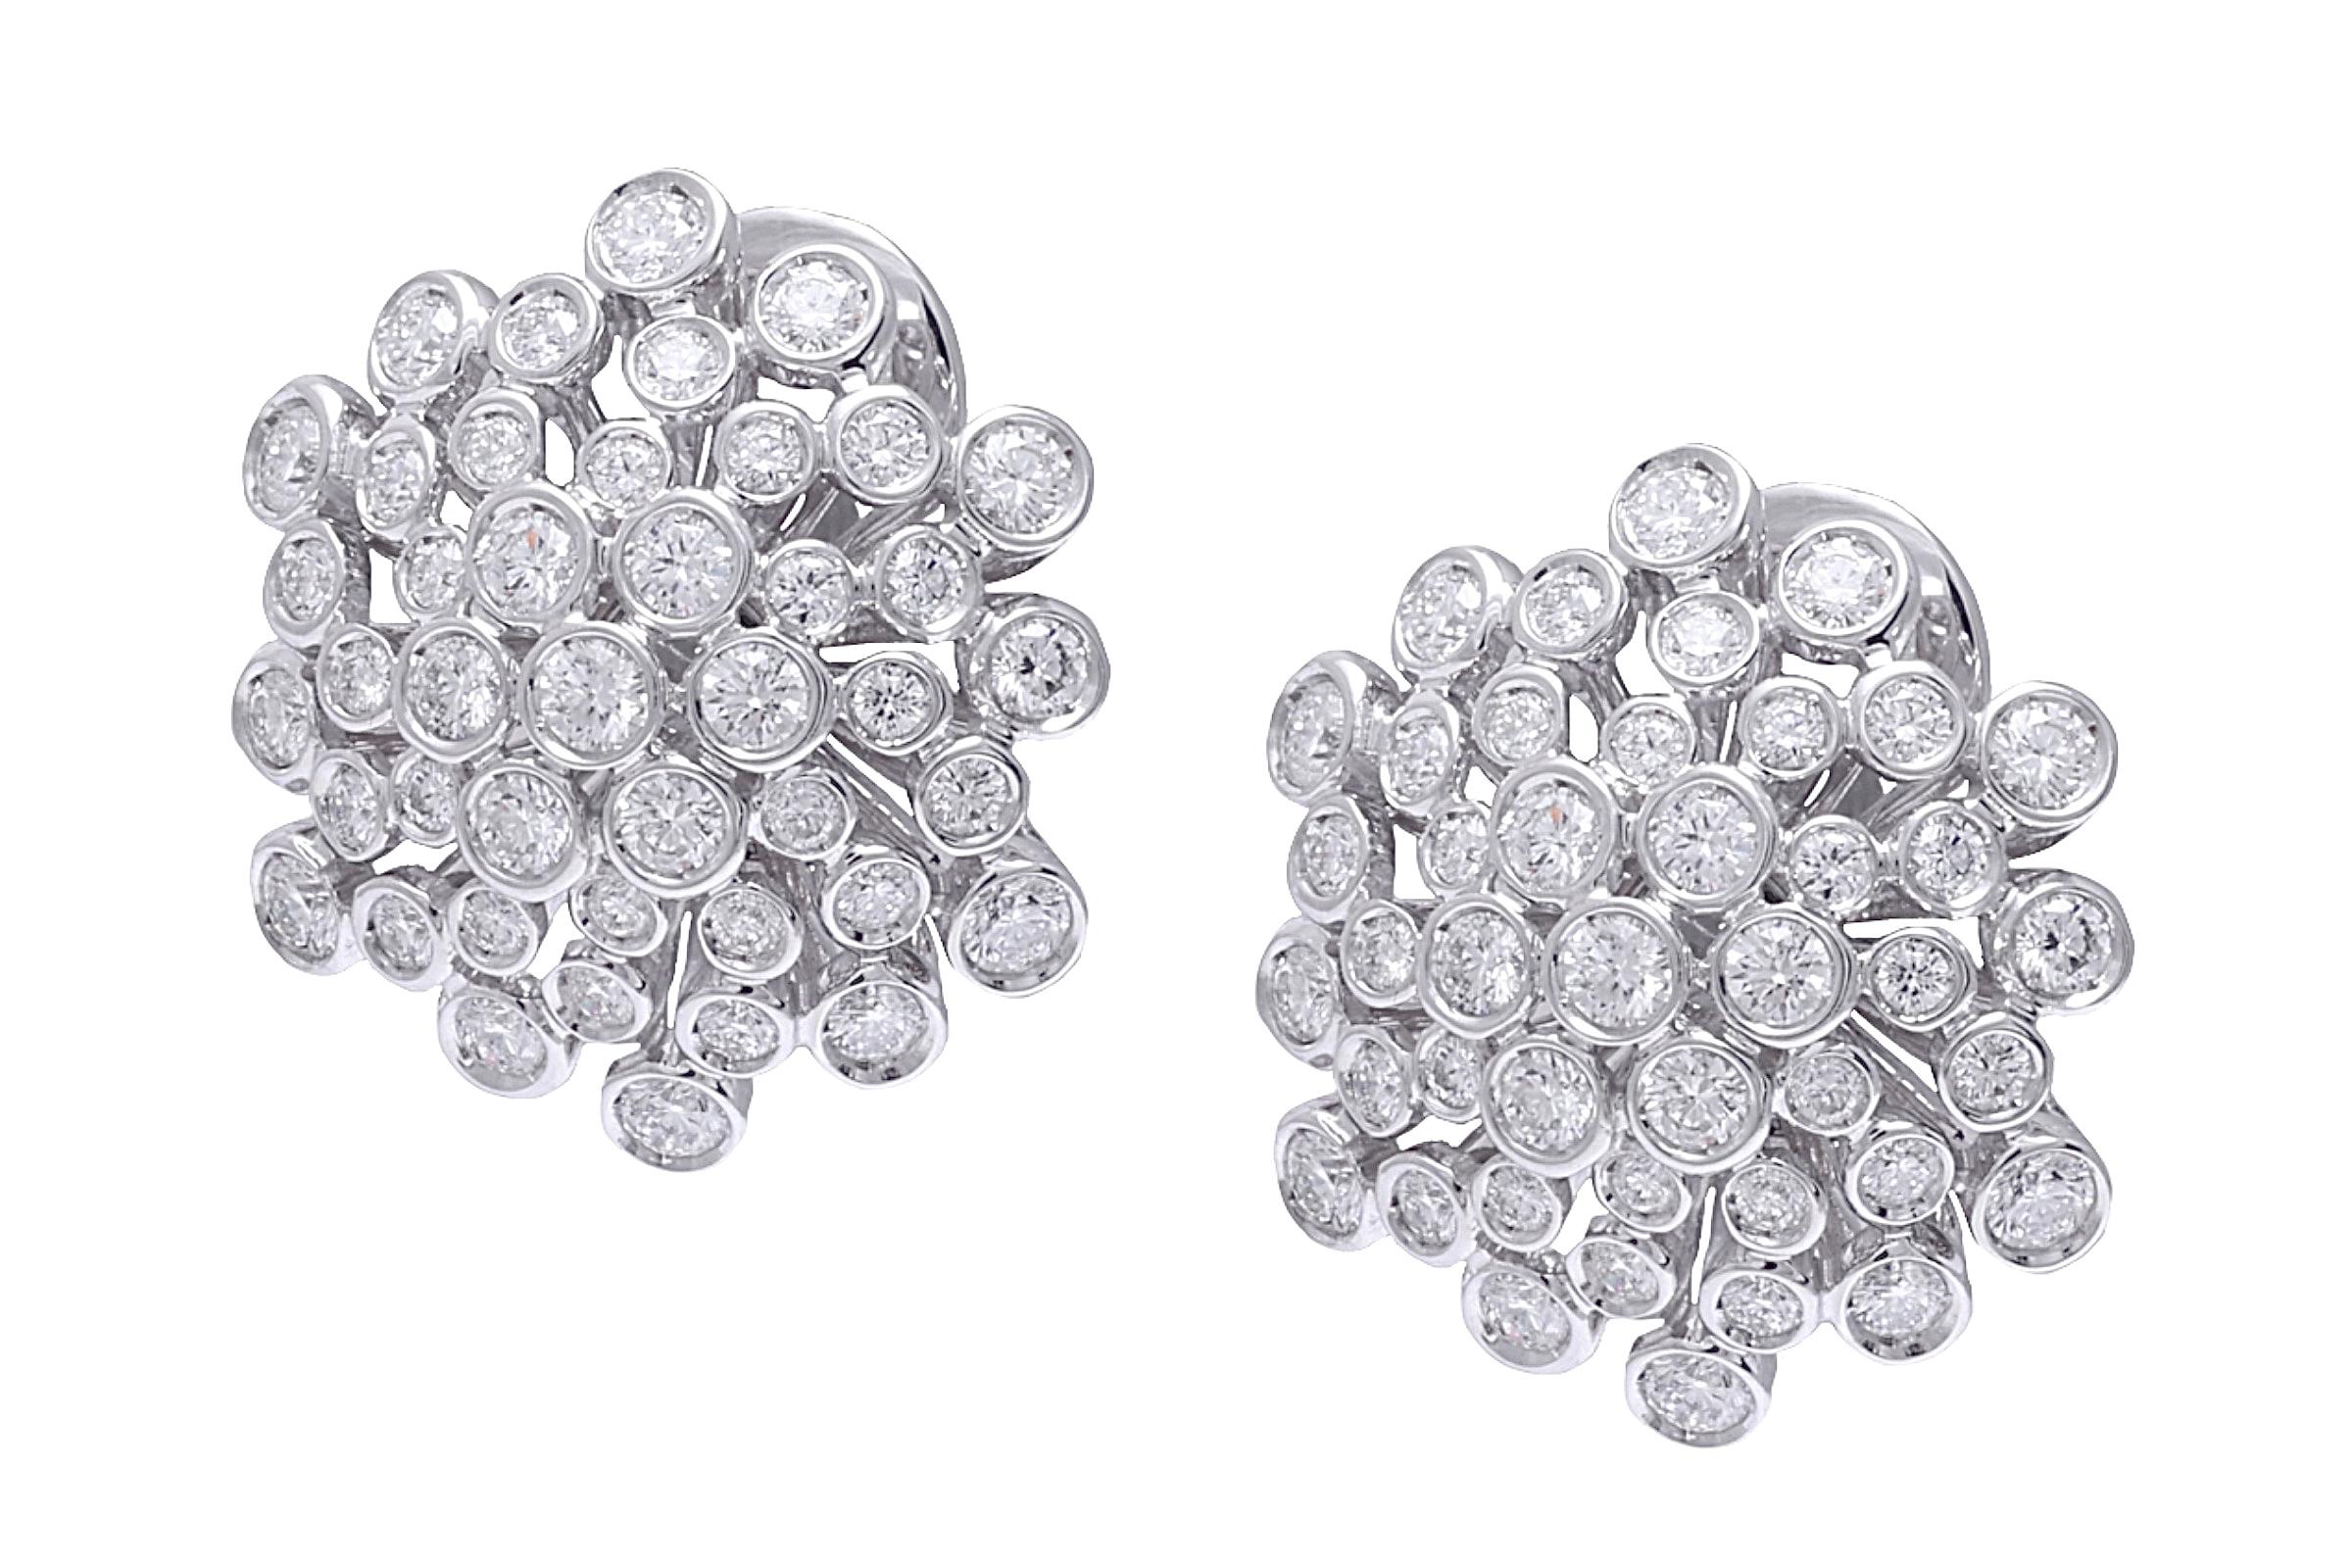 Gorgeous 18 kt white gold diamond stud earrings.
Diamonds: Brilliant cut diamonds, together ca. 3.10 Cts G VS
Material: 18 kt white gold
Measurements: diameter 20.4 mm 
Total weight: 15.9 gram
